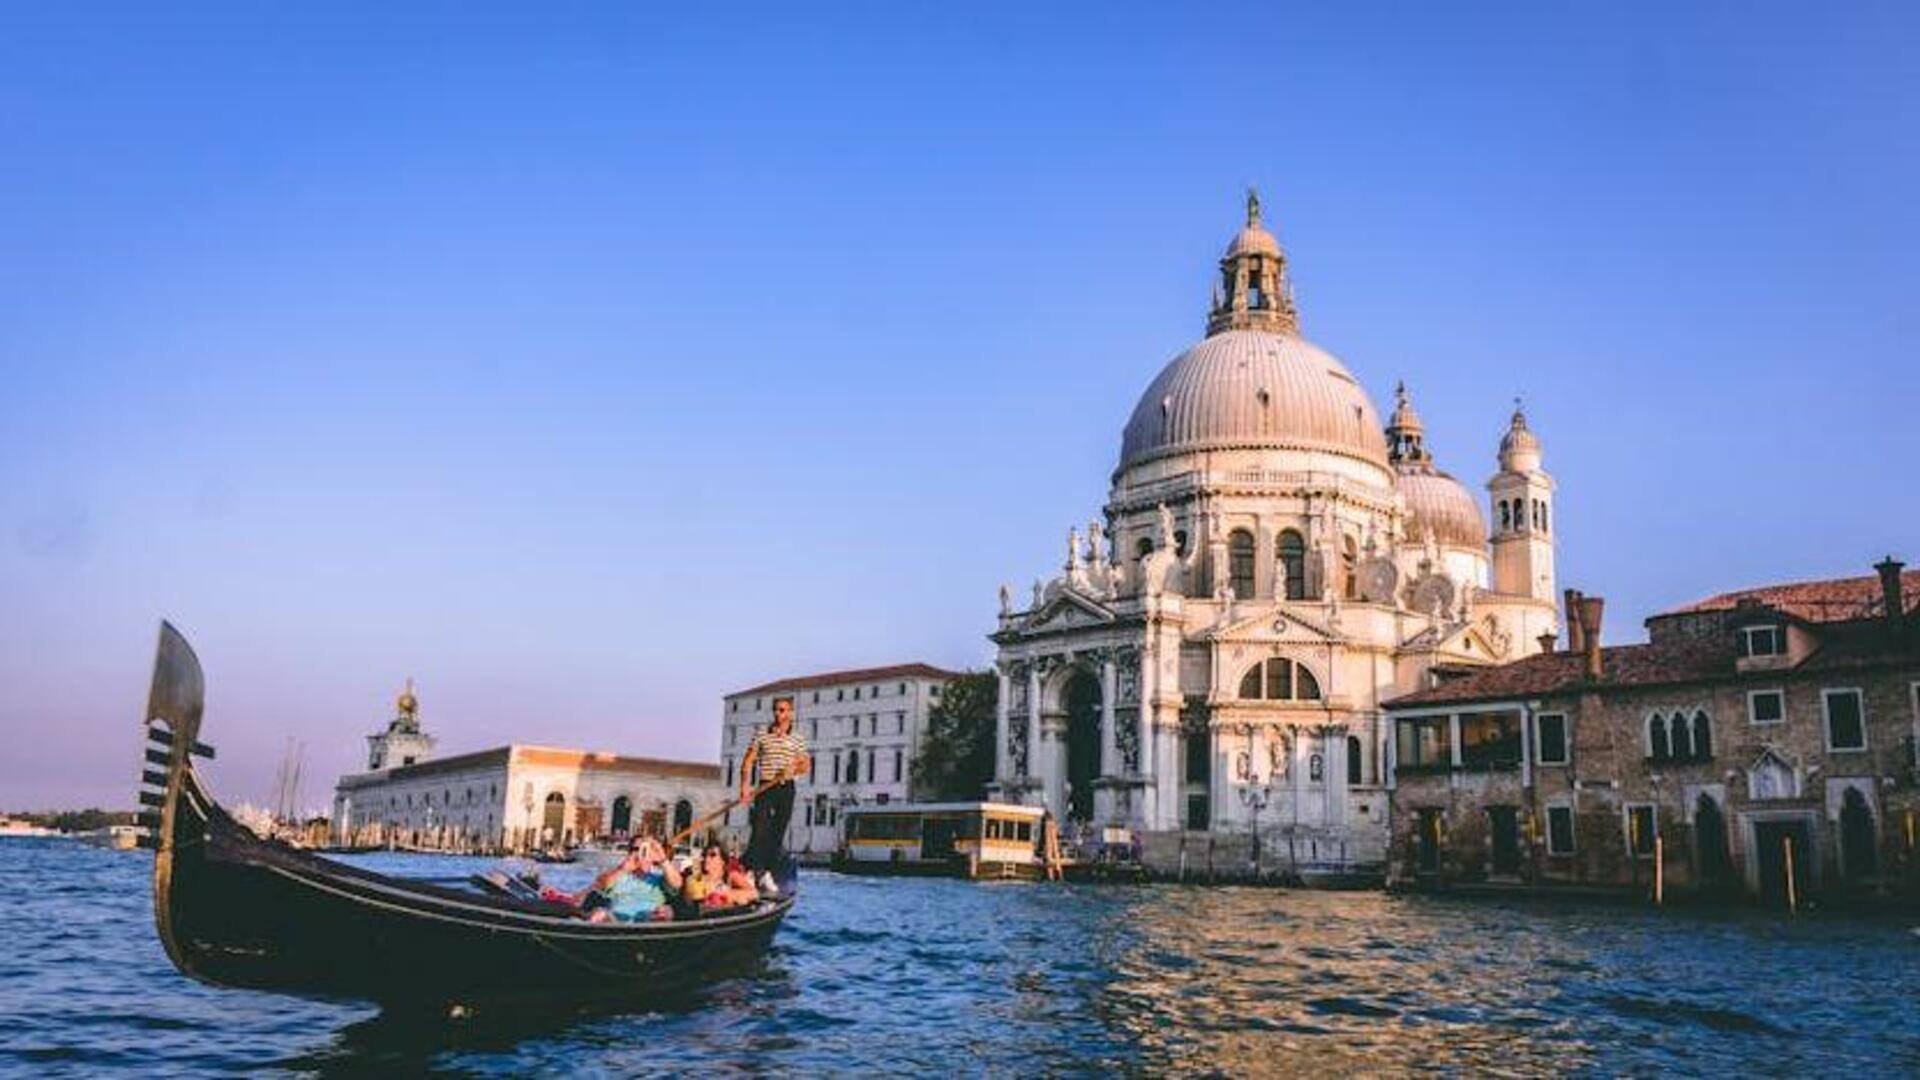 Enjoy Venice's unique water wonders with this travel guide